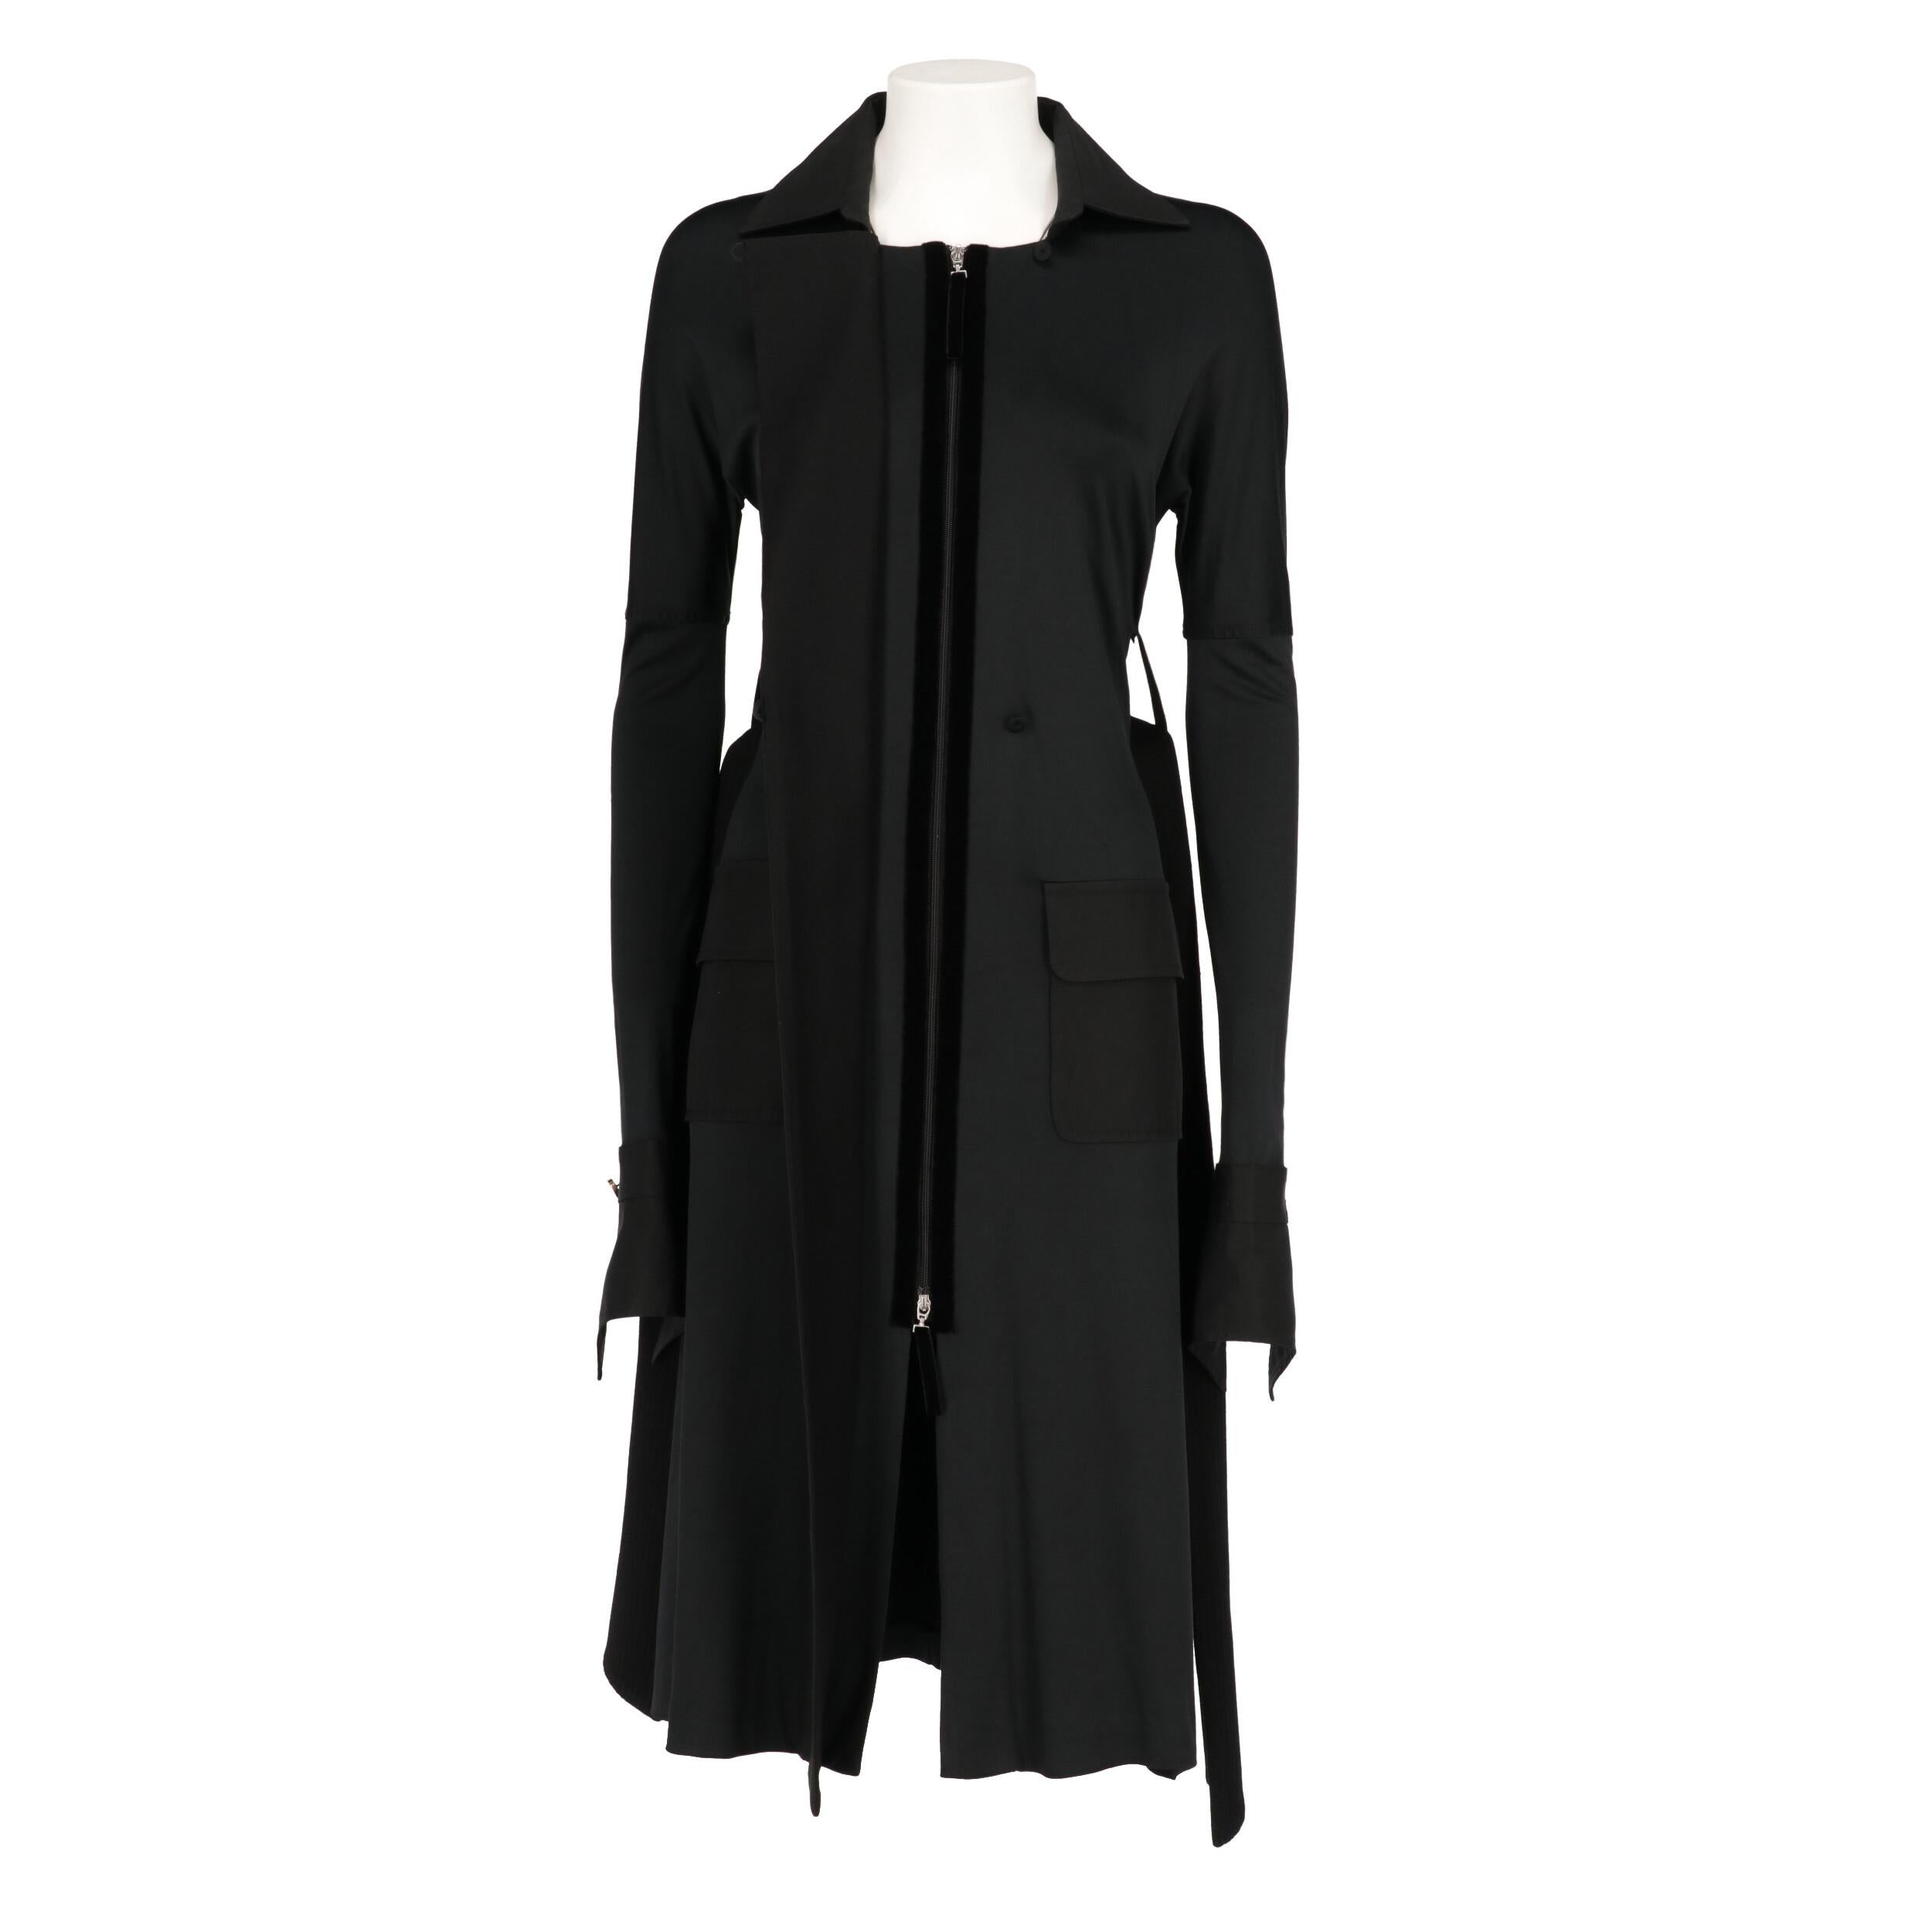 Gianfranco Ferré black viscose blend overcoat. Classic collar, zip and buttons  closure and belt at the waist. Drop shoulders, long sleeves and flap pockets.

The product shows some unstitched threads as shown in the pictures.
Year: 2007

Made in